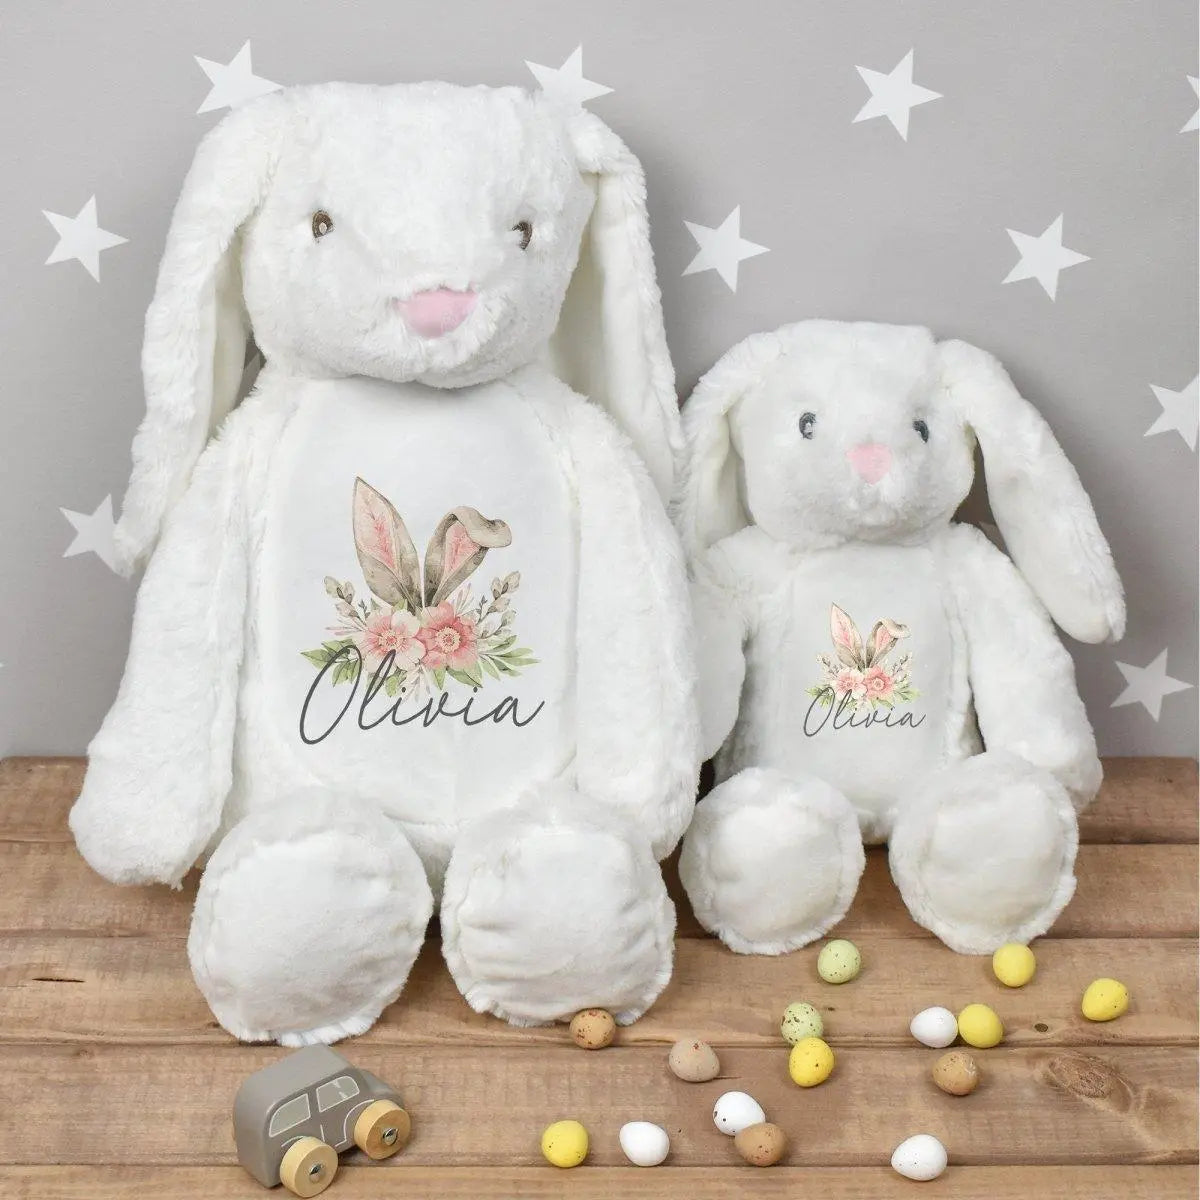 Personalised Easter Bunny, Easter Bunny Teddy, Baby Easter Gift, Easter Gift for Girls, Personalised Easter Teddy, Easter Rabbit Soft Toy - Amy Lucy